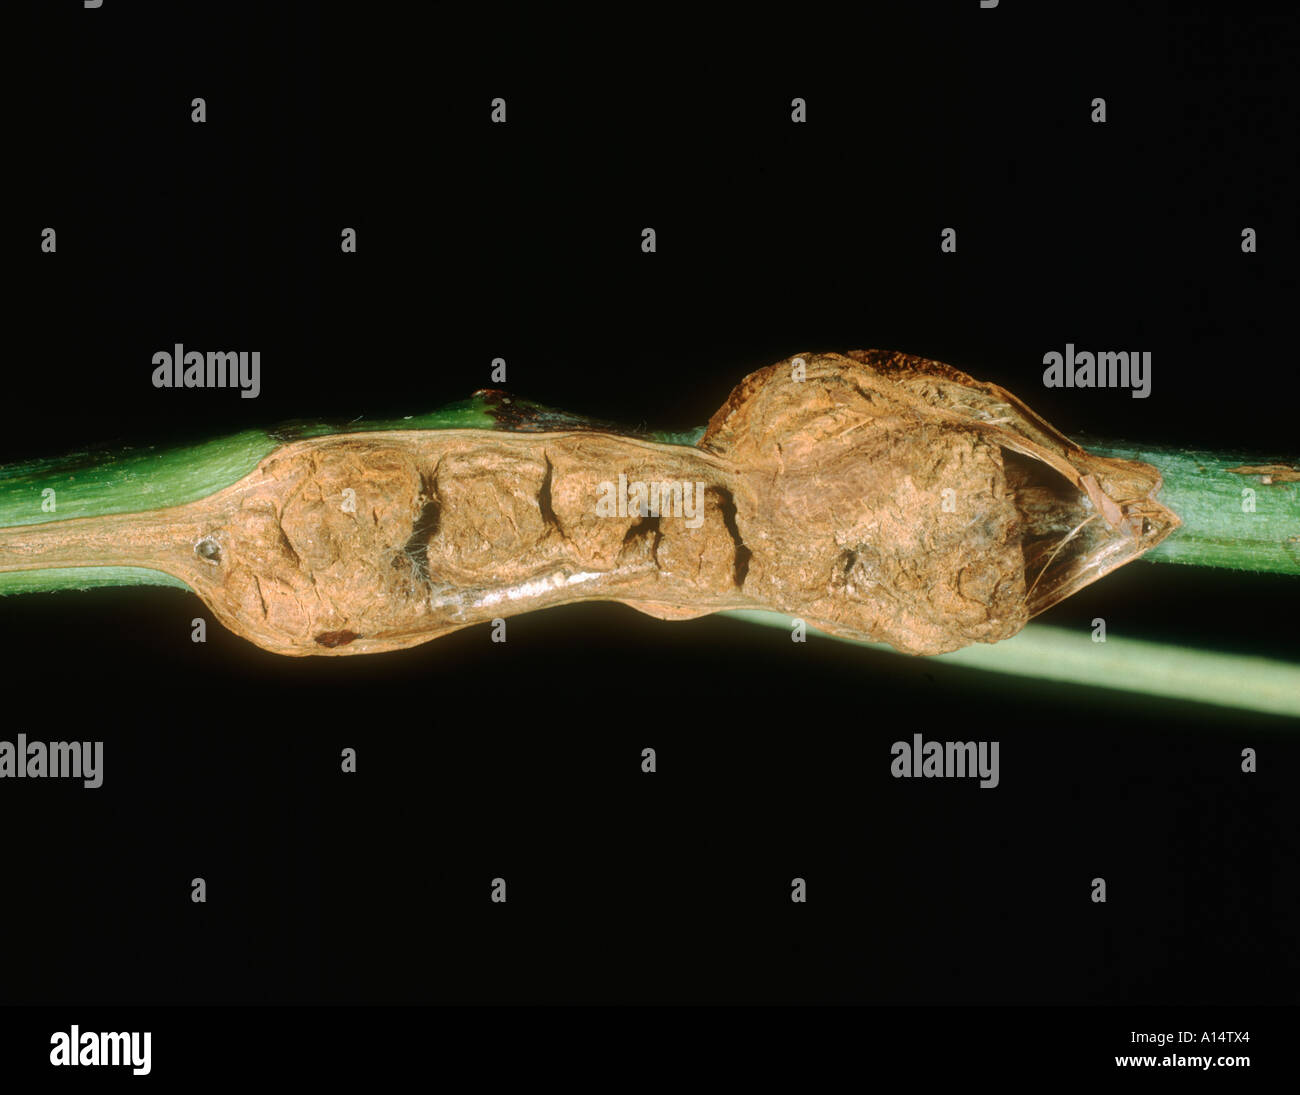 Crown gall Agrobacterium tumifasciens on loganberry stem Stock Photo